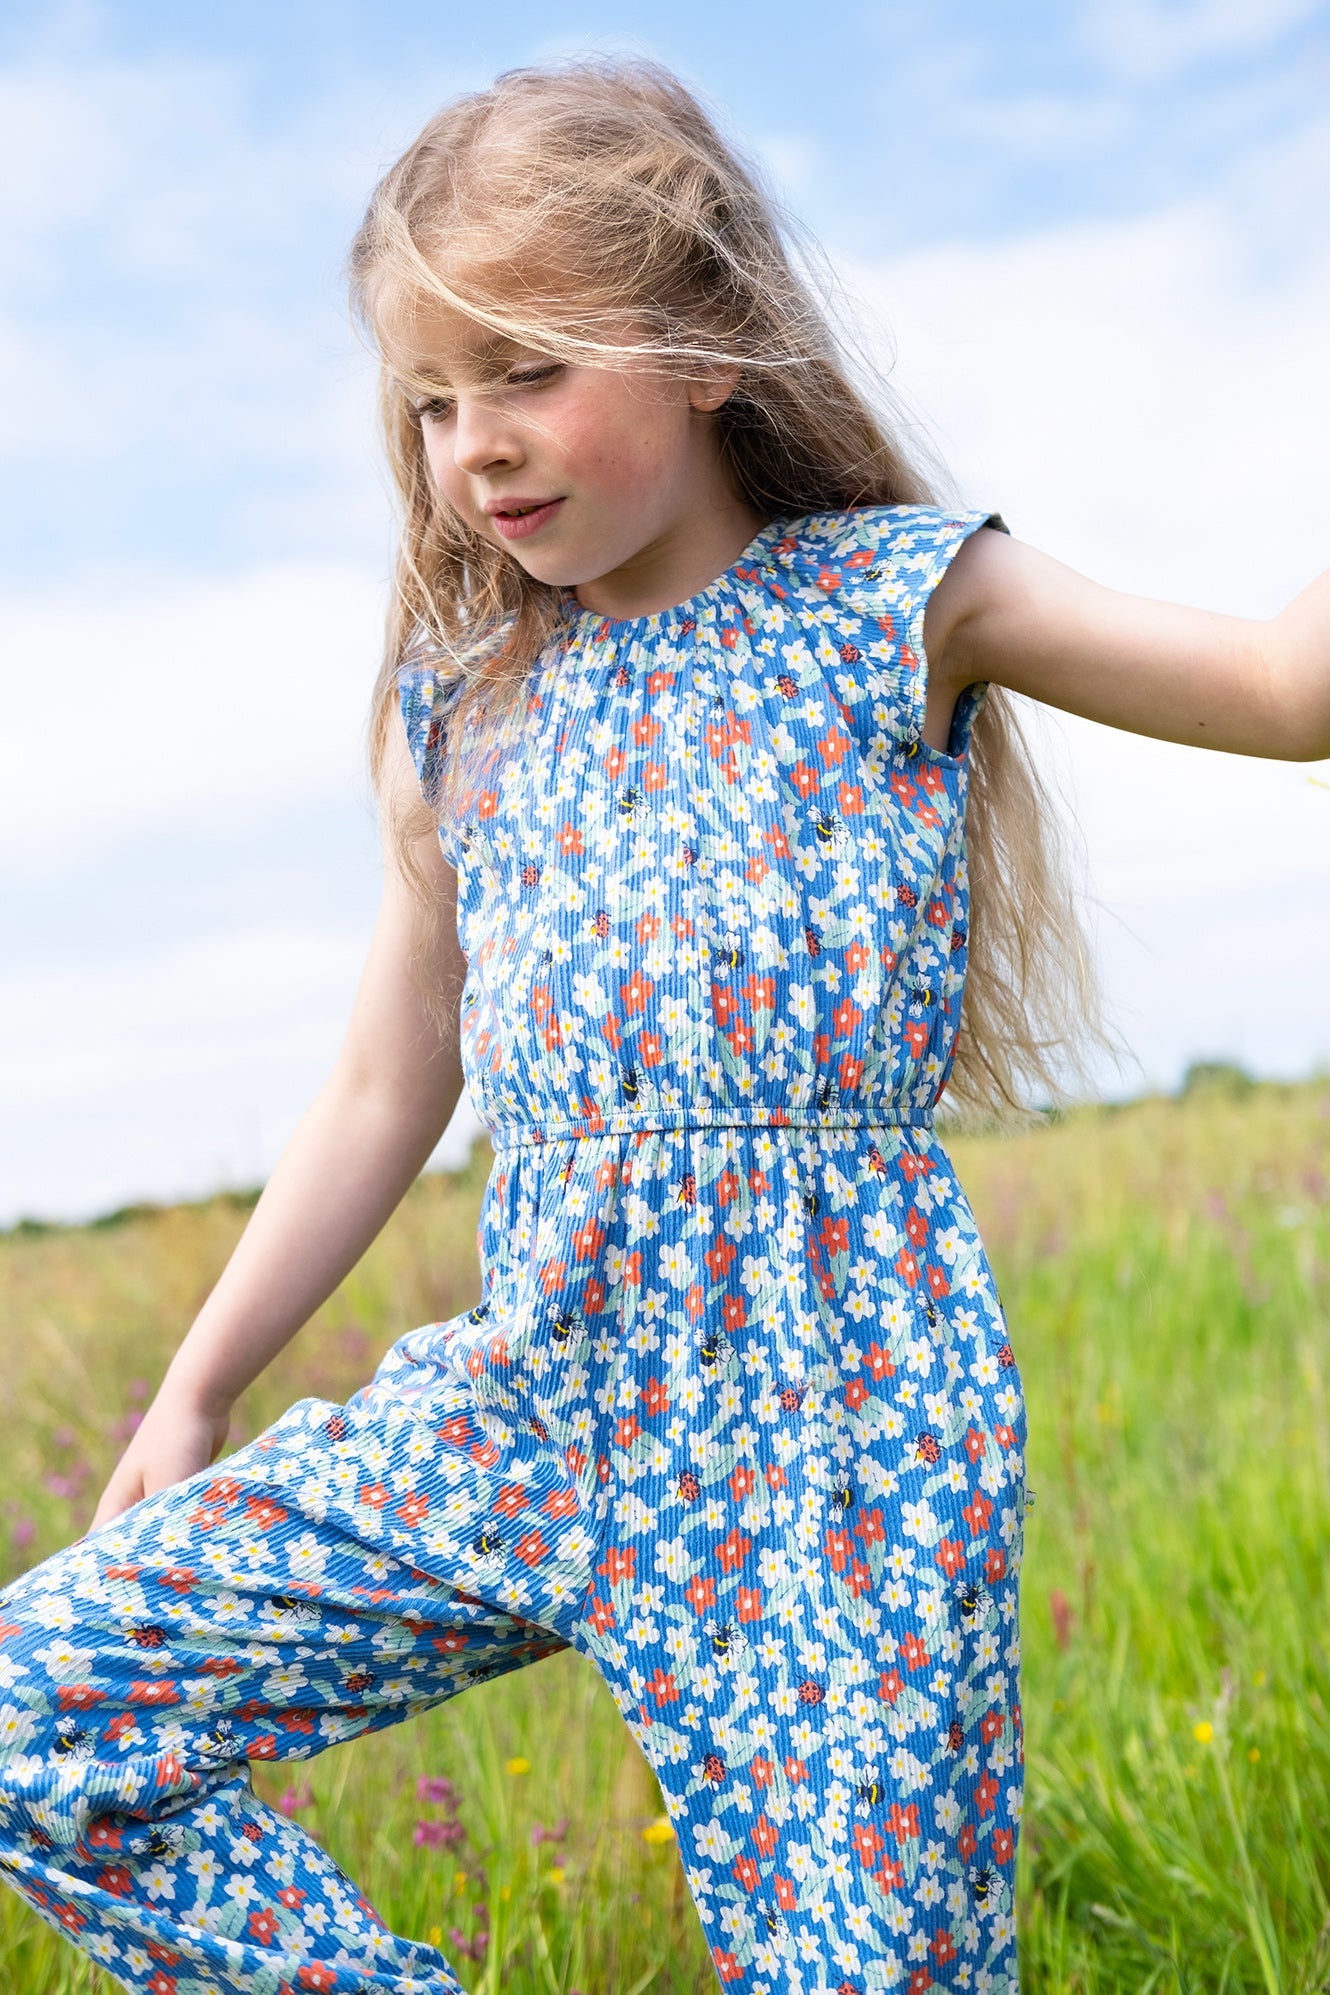 Frugi Jolee Jumpsuit - Floral Fun-Kids-Ohh! By Gum - Shop Sustainable